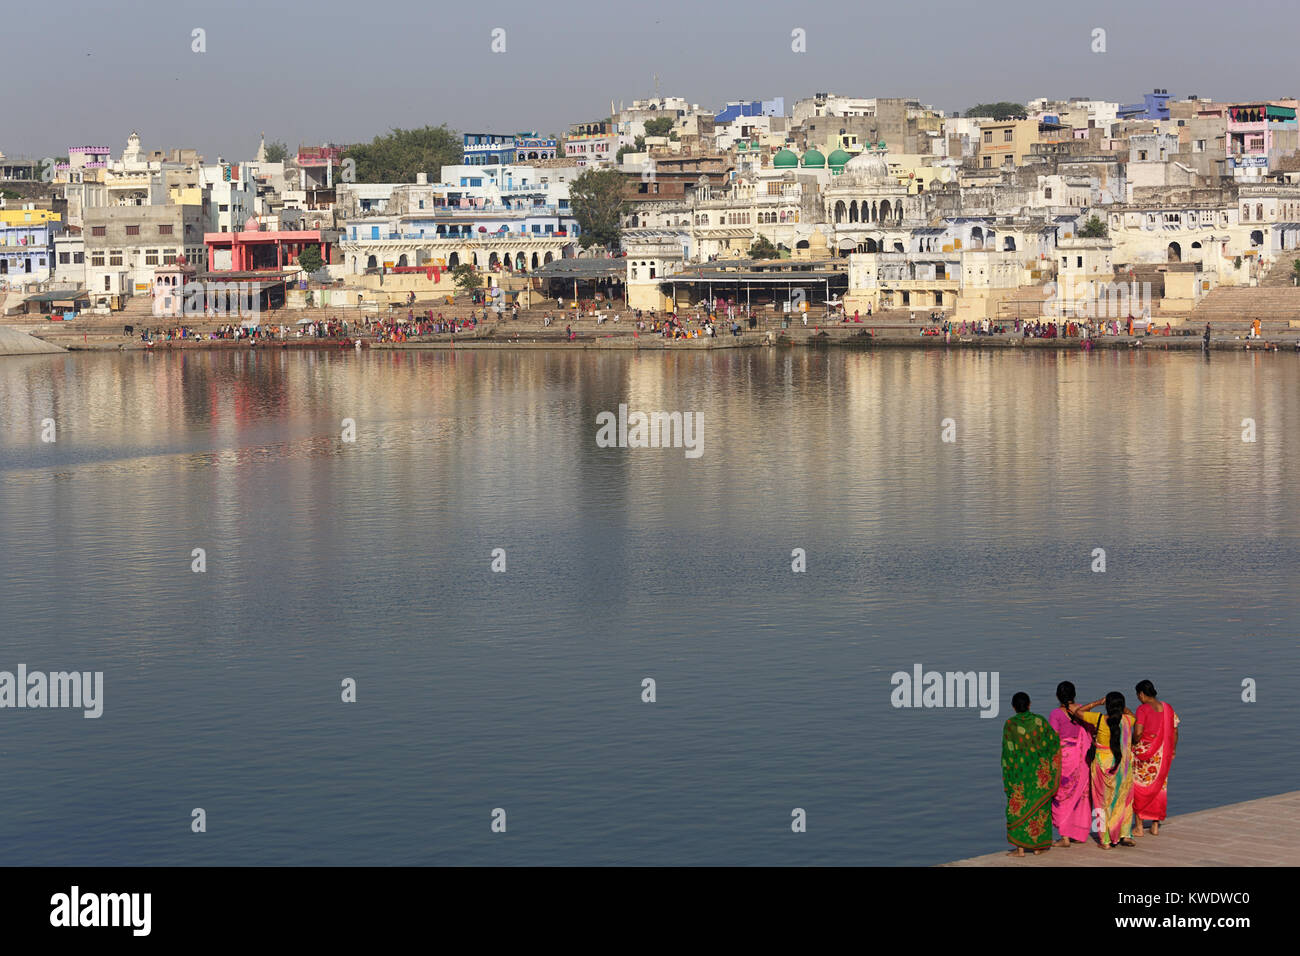 Four indian women in sari standing on the banks of holy lake at Pushkar with Hindu pilgrims taking ritual bath on the opposite side, Rajasthan, India. Stock Photo